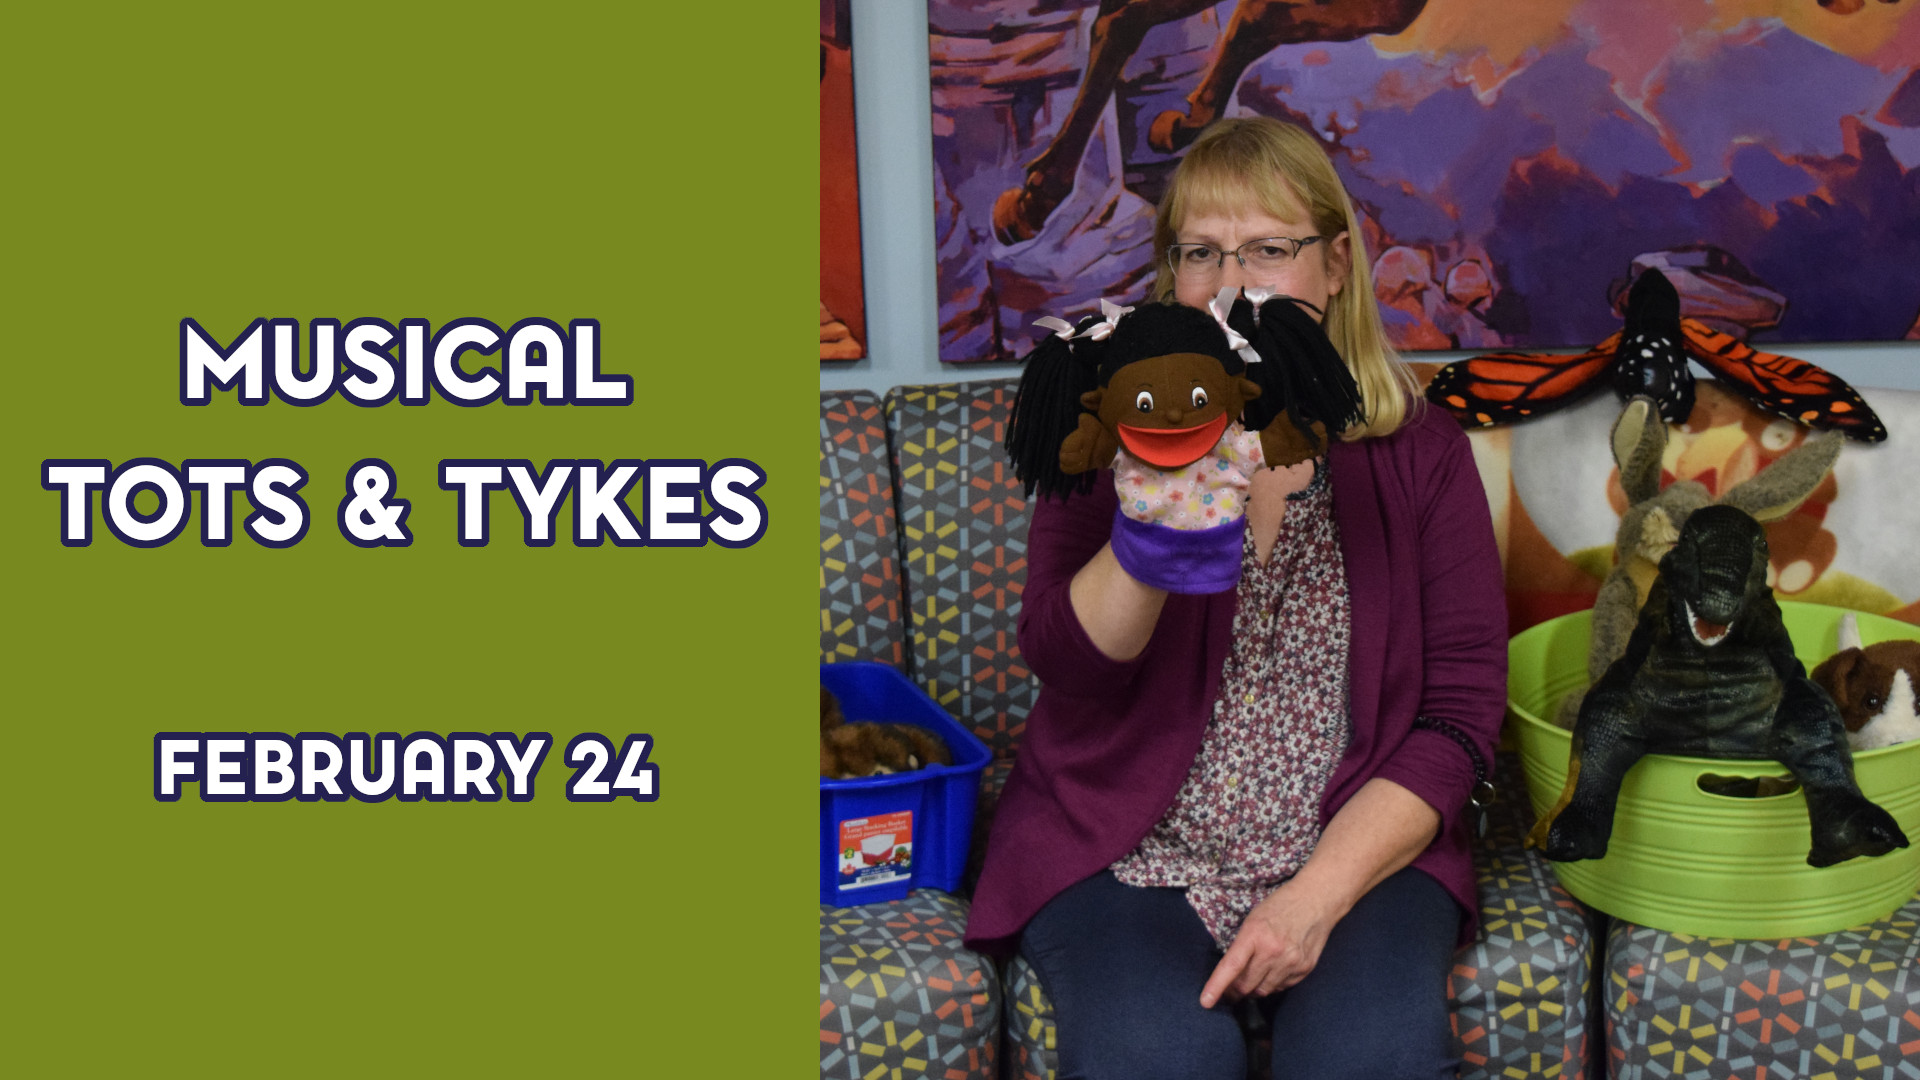 A woman holds a young girl puppet next to the text "Musical Tots & Tykes February 24"